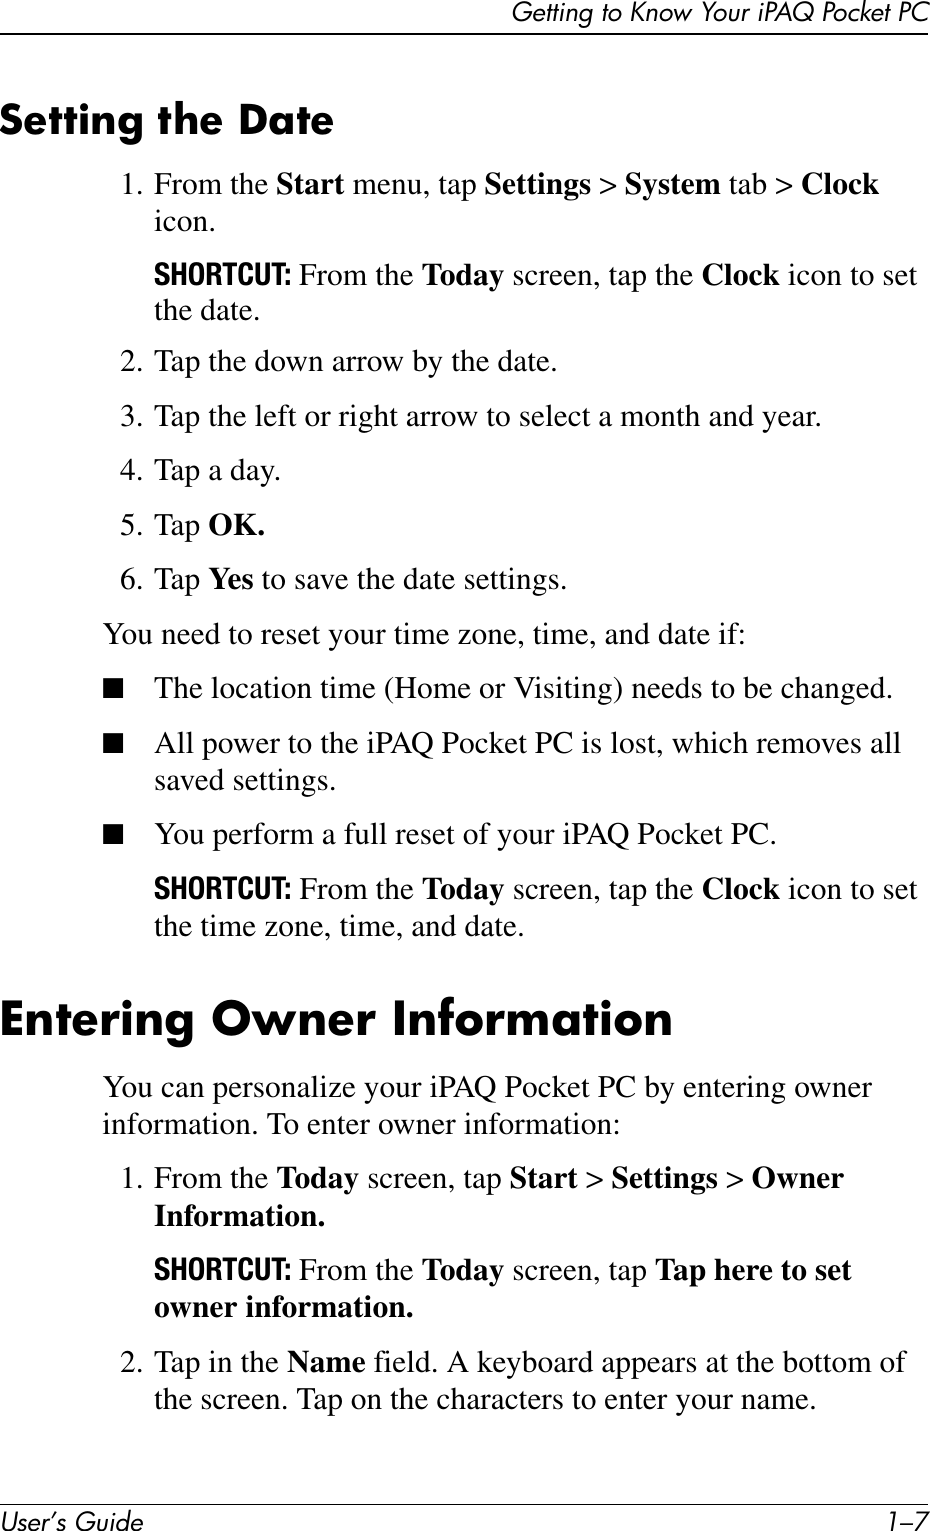 Getting to Know Your iPAQ Pocket PCUser’s Guide 1–7Setting the Date1. From the Start menu, tap Settings &gt; System tab &gt; Clock icon.SHORTCUT: From the Today screen, tap the Clock icon to set the date.2. Tap the down arrow by the date.3. Tap the left or right arrow to select a month and year.4. Tap a day.5. Tap OK.6. Tap Ye s  to save the date settings.You need to reset your time zone, time, and date if:■The location time (Home or Visiting) needs to be changed.■All power to the iPAQ Pocket PC is lost, which removes all saved settings.■You perform a full reset of your iPAQ Pocket PC.SHORTCUT: From the Today screen, tap the Clock icon to set the time zone, time, and date.Entering Owner InformationYou can personalize your iPAQ Pocket PC by entering owner information. To enter owner information:1. From the Today screen, tap Start &gt; Settings &gt; Owner Information.SHORTCUT: From the Today screen, tap Tap here to set owner information.2. Tap in the Name field. A keyboard appears at the bottom of the screen. Tap on the characters to enter your name.